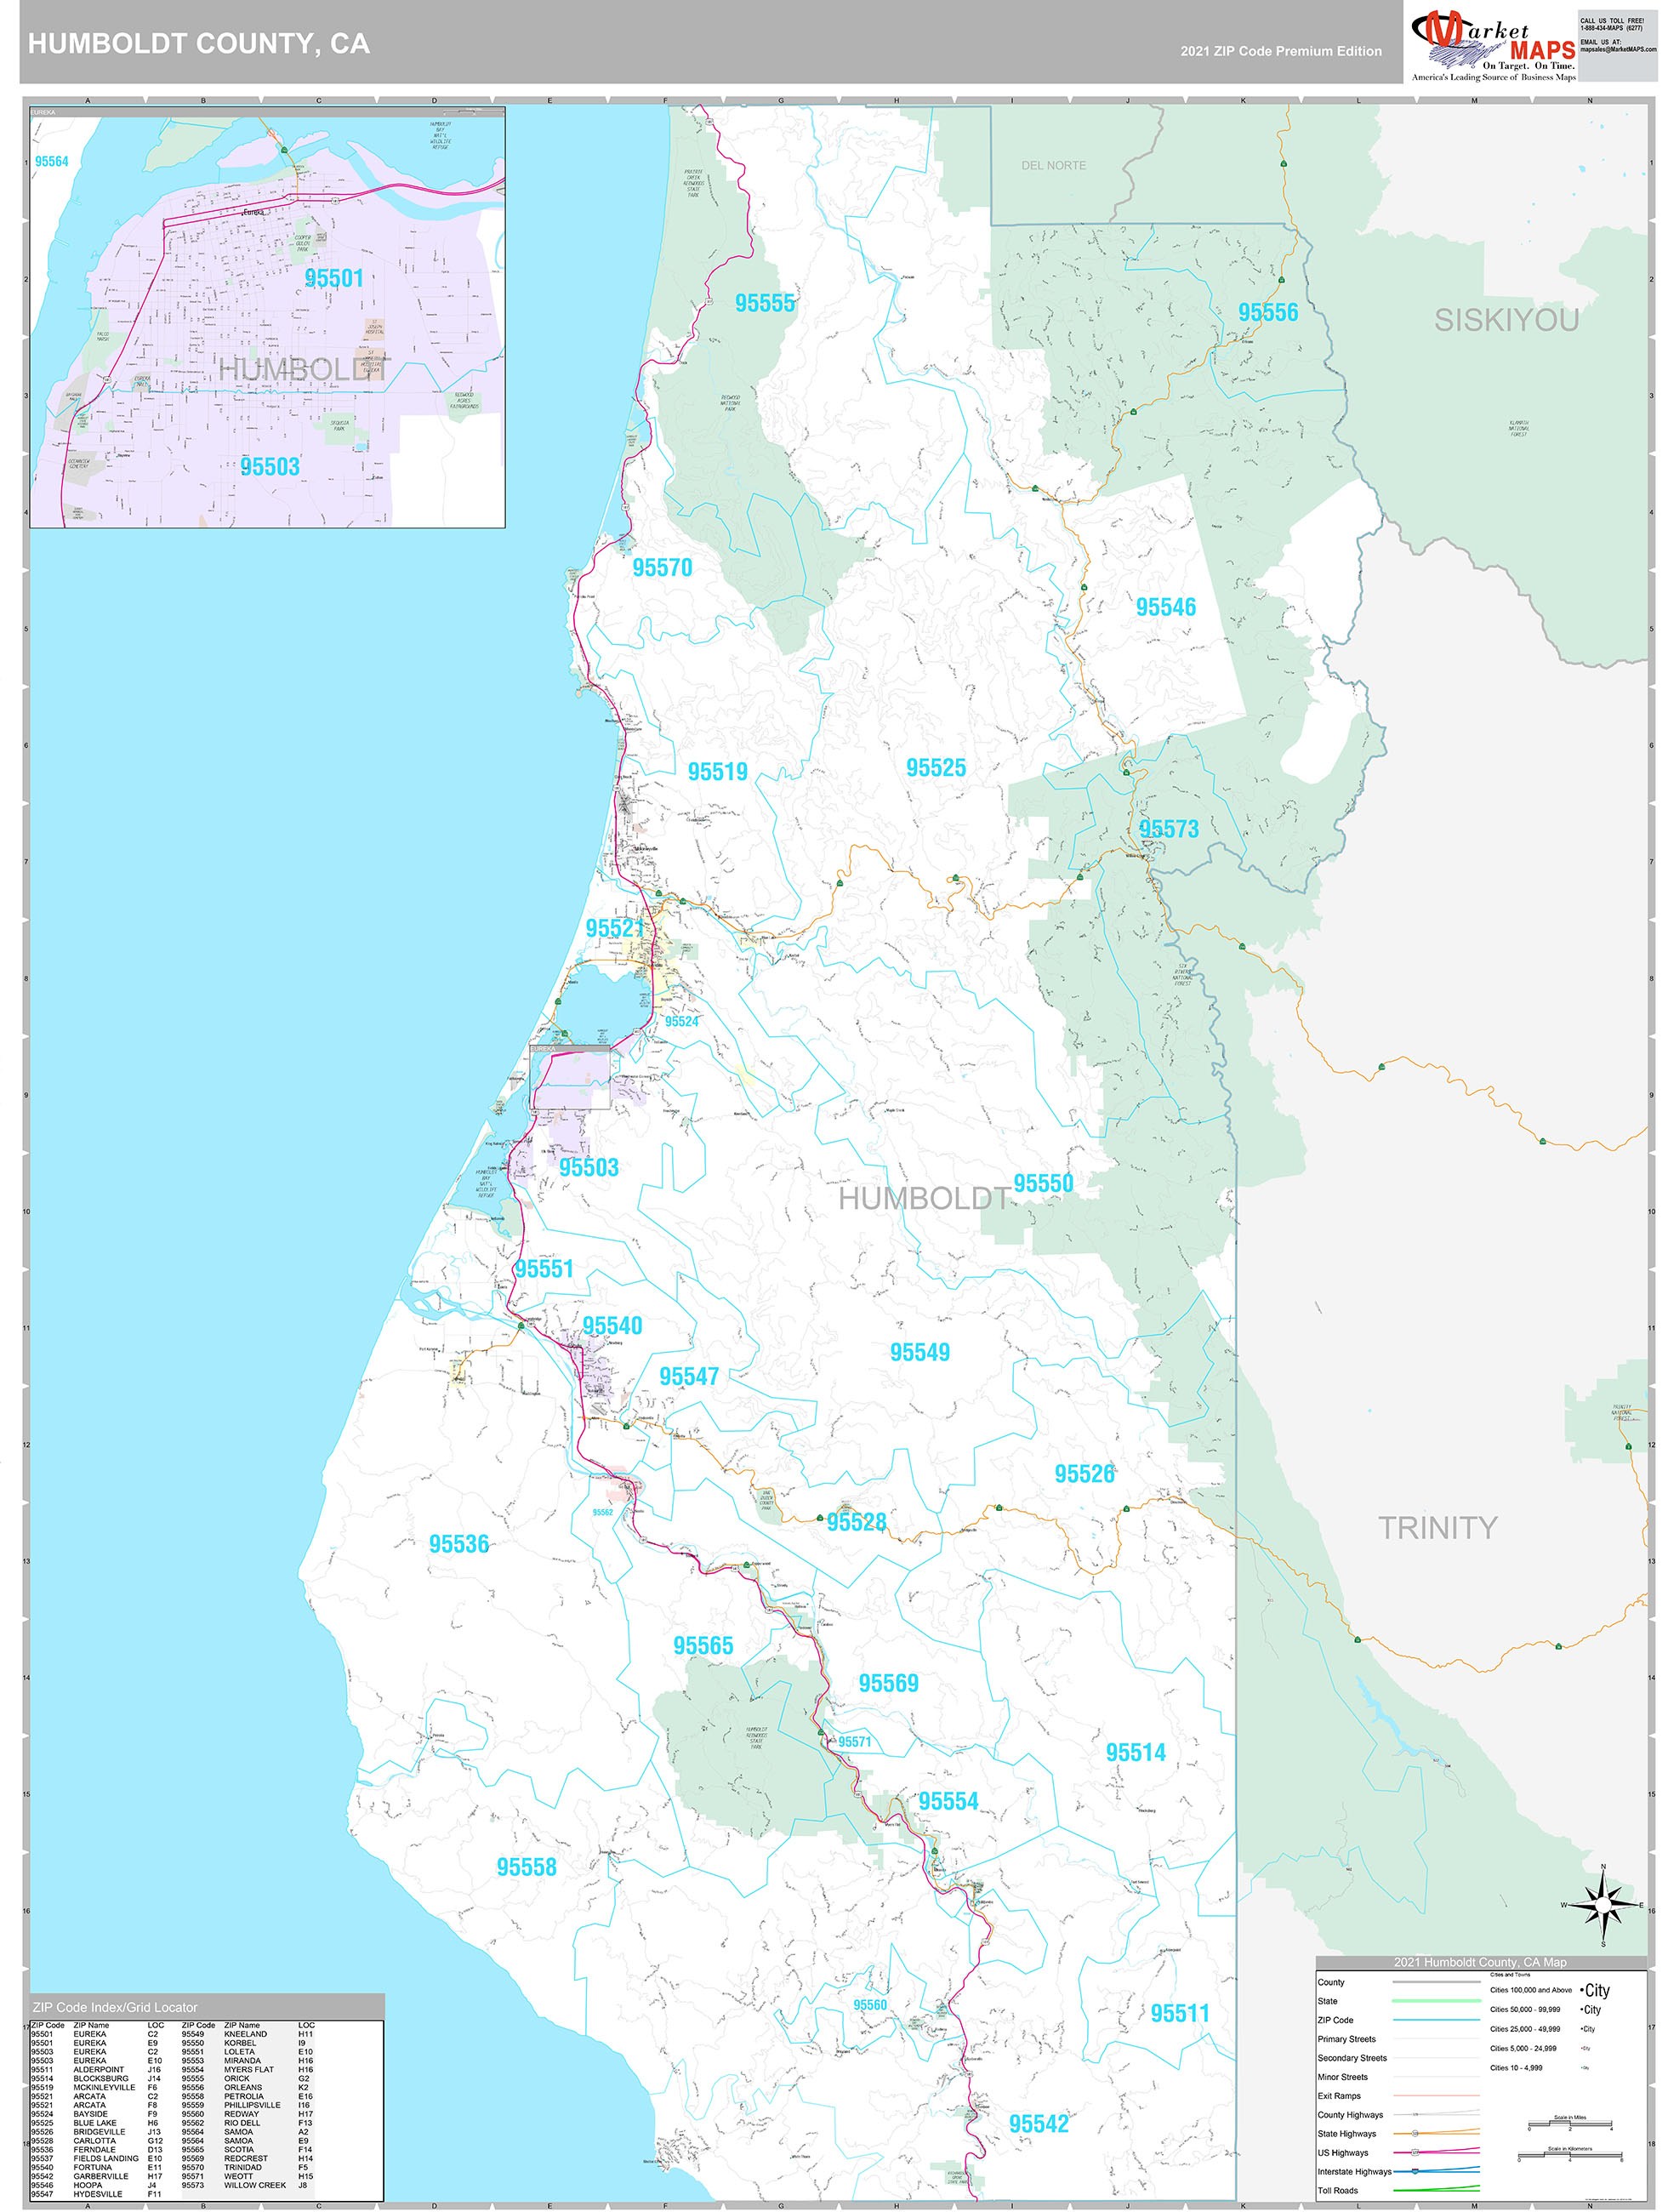 humboldt-county-ca-wall-map-premium-style-by-marketmaps-mapsales